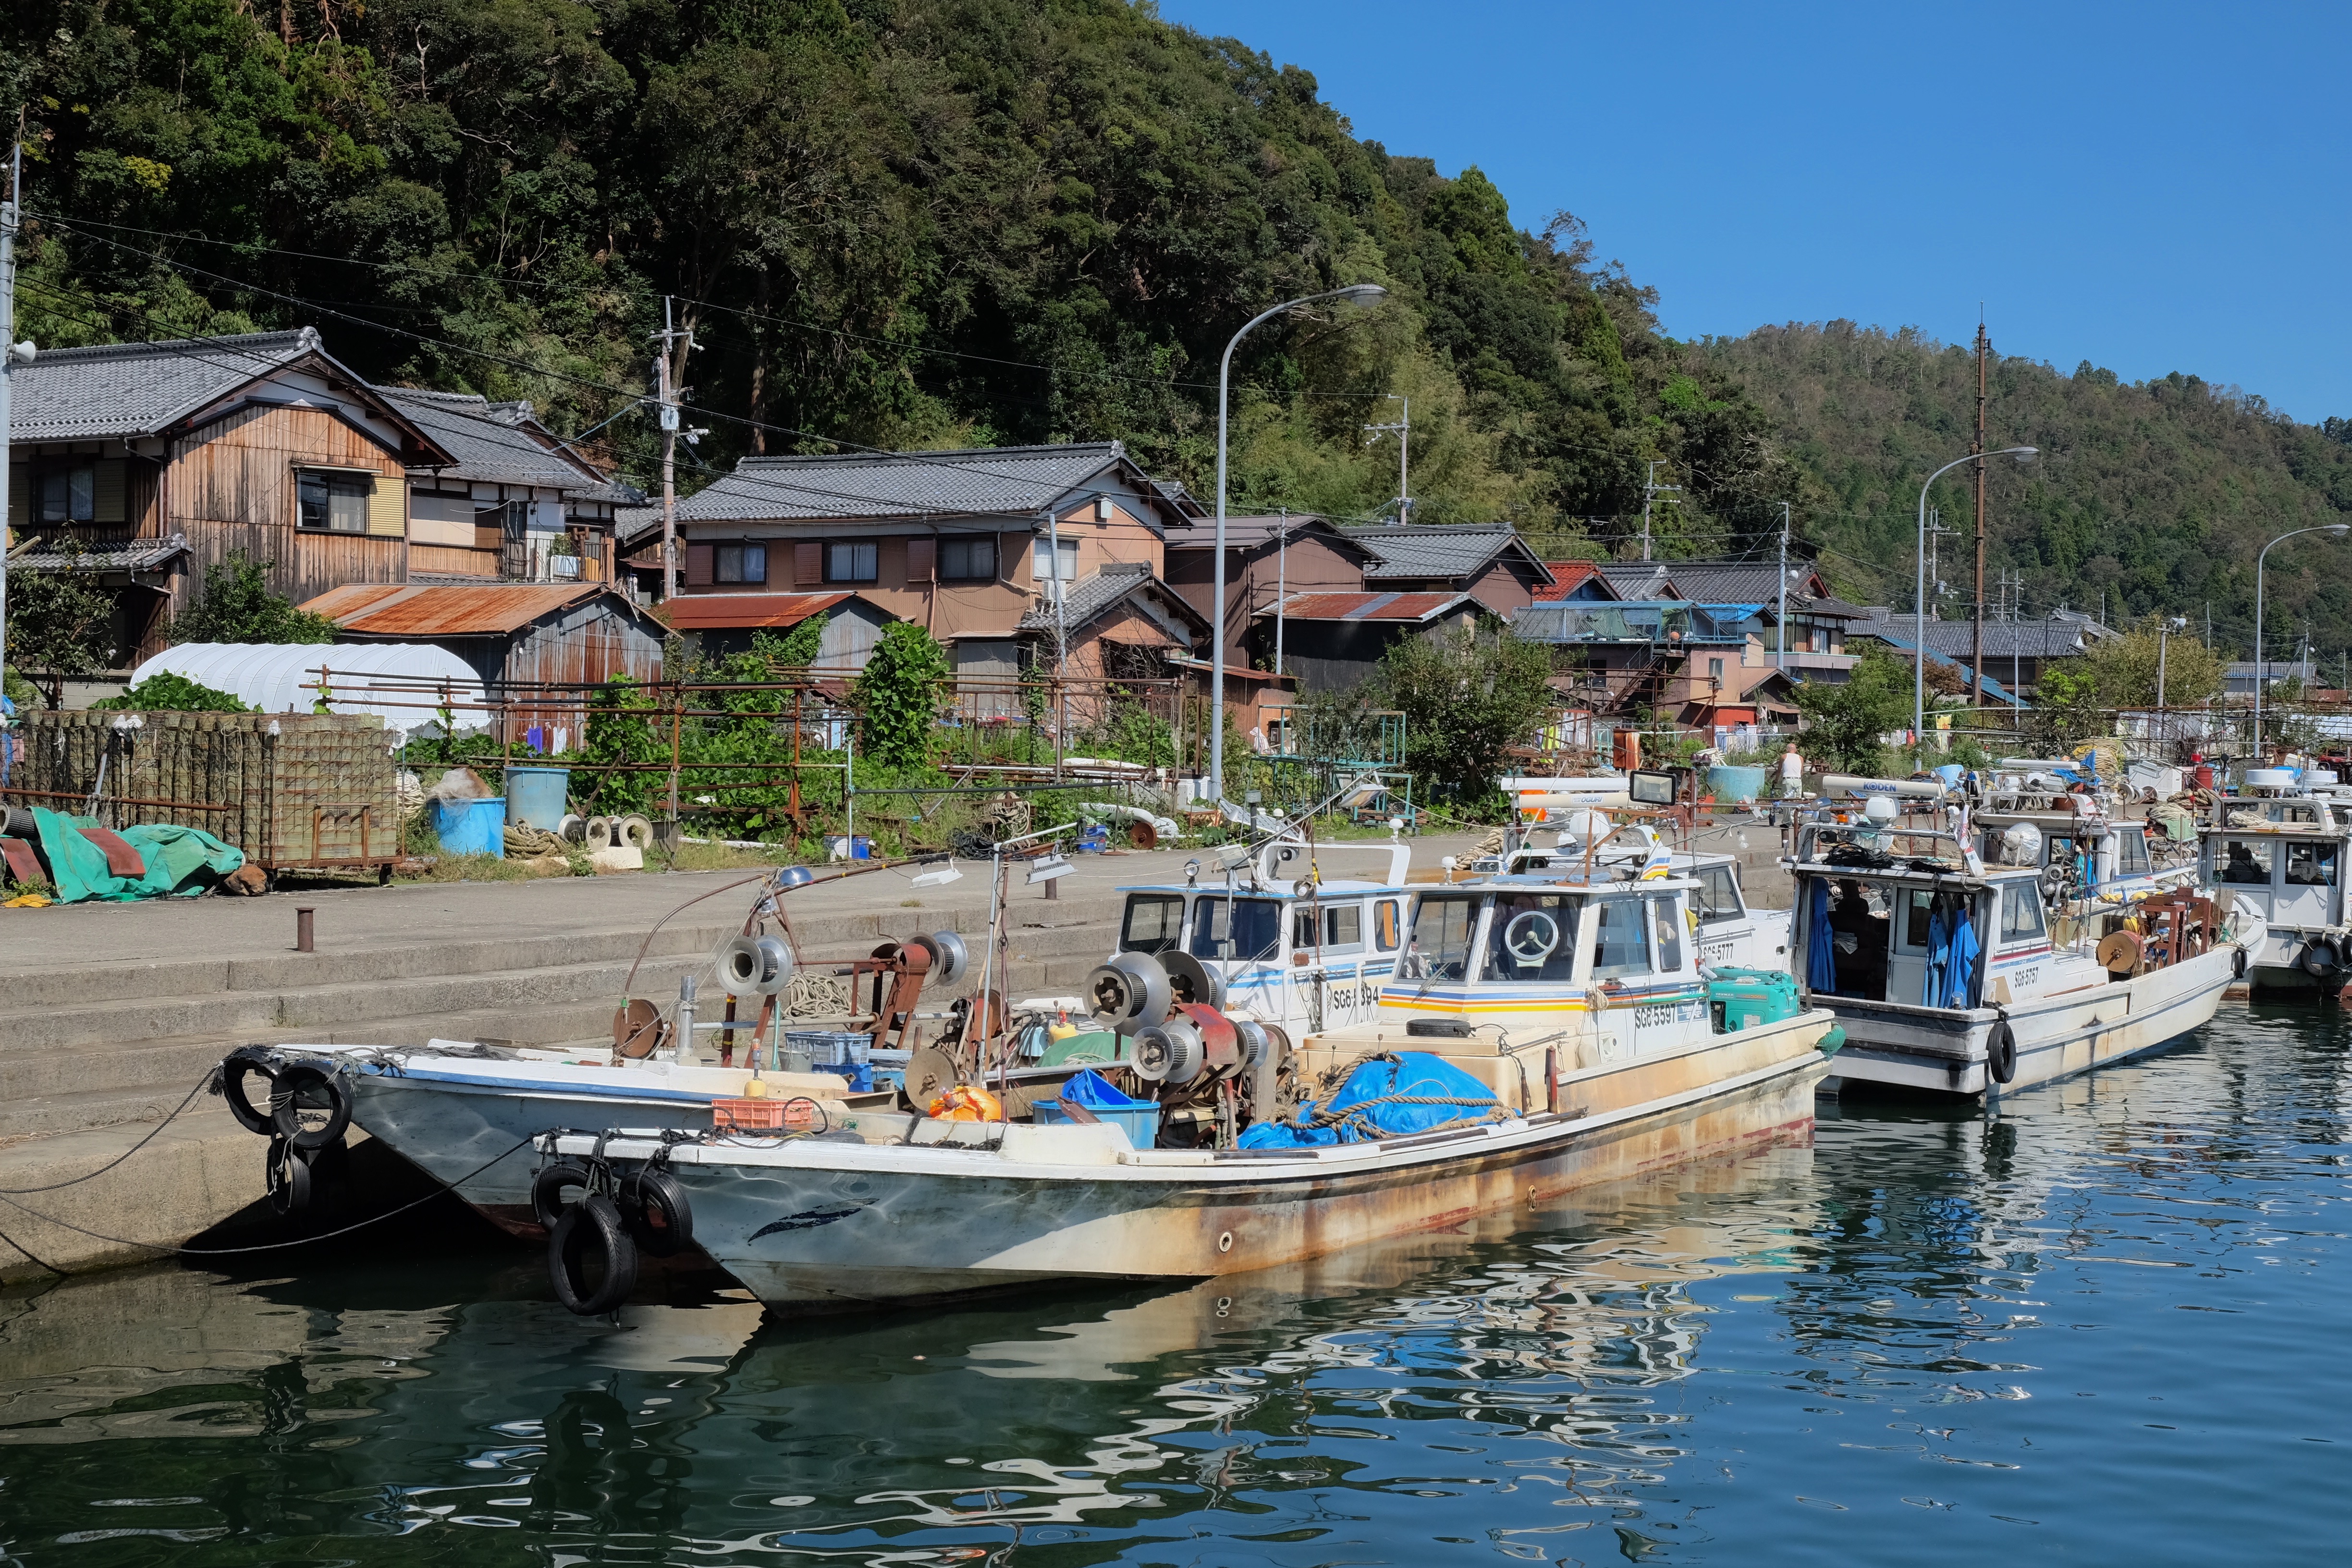 Fishing boats in the habour of Okishima. Most residents make a living by fishing, but tourists also bring revenue to the island. (8 October 2018)